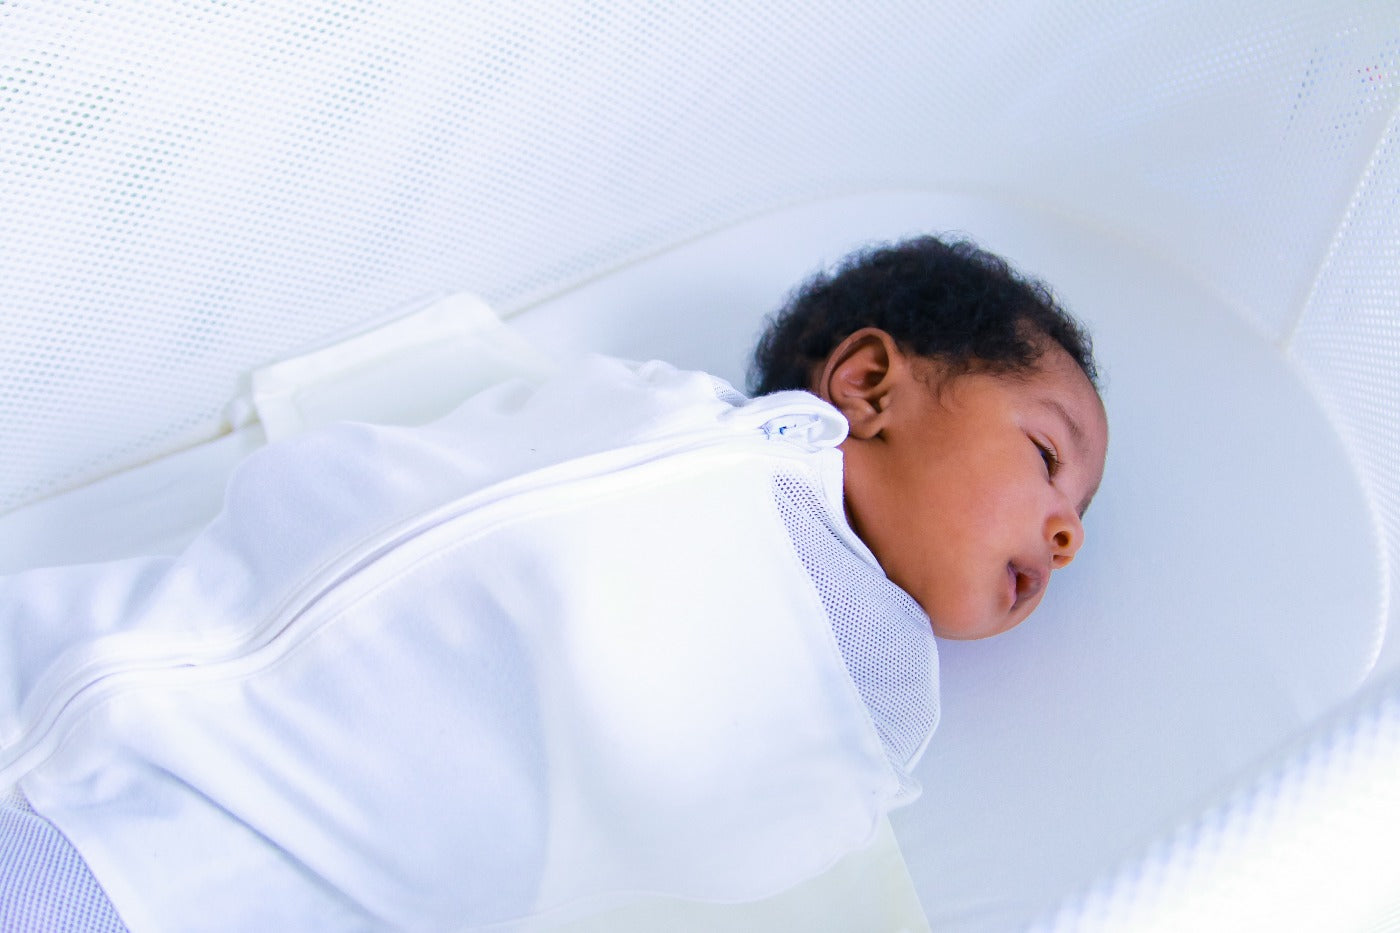 Baby Sleep Schedule: What to Expect Between 4 and 6 Months